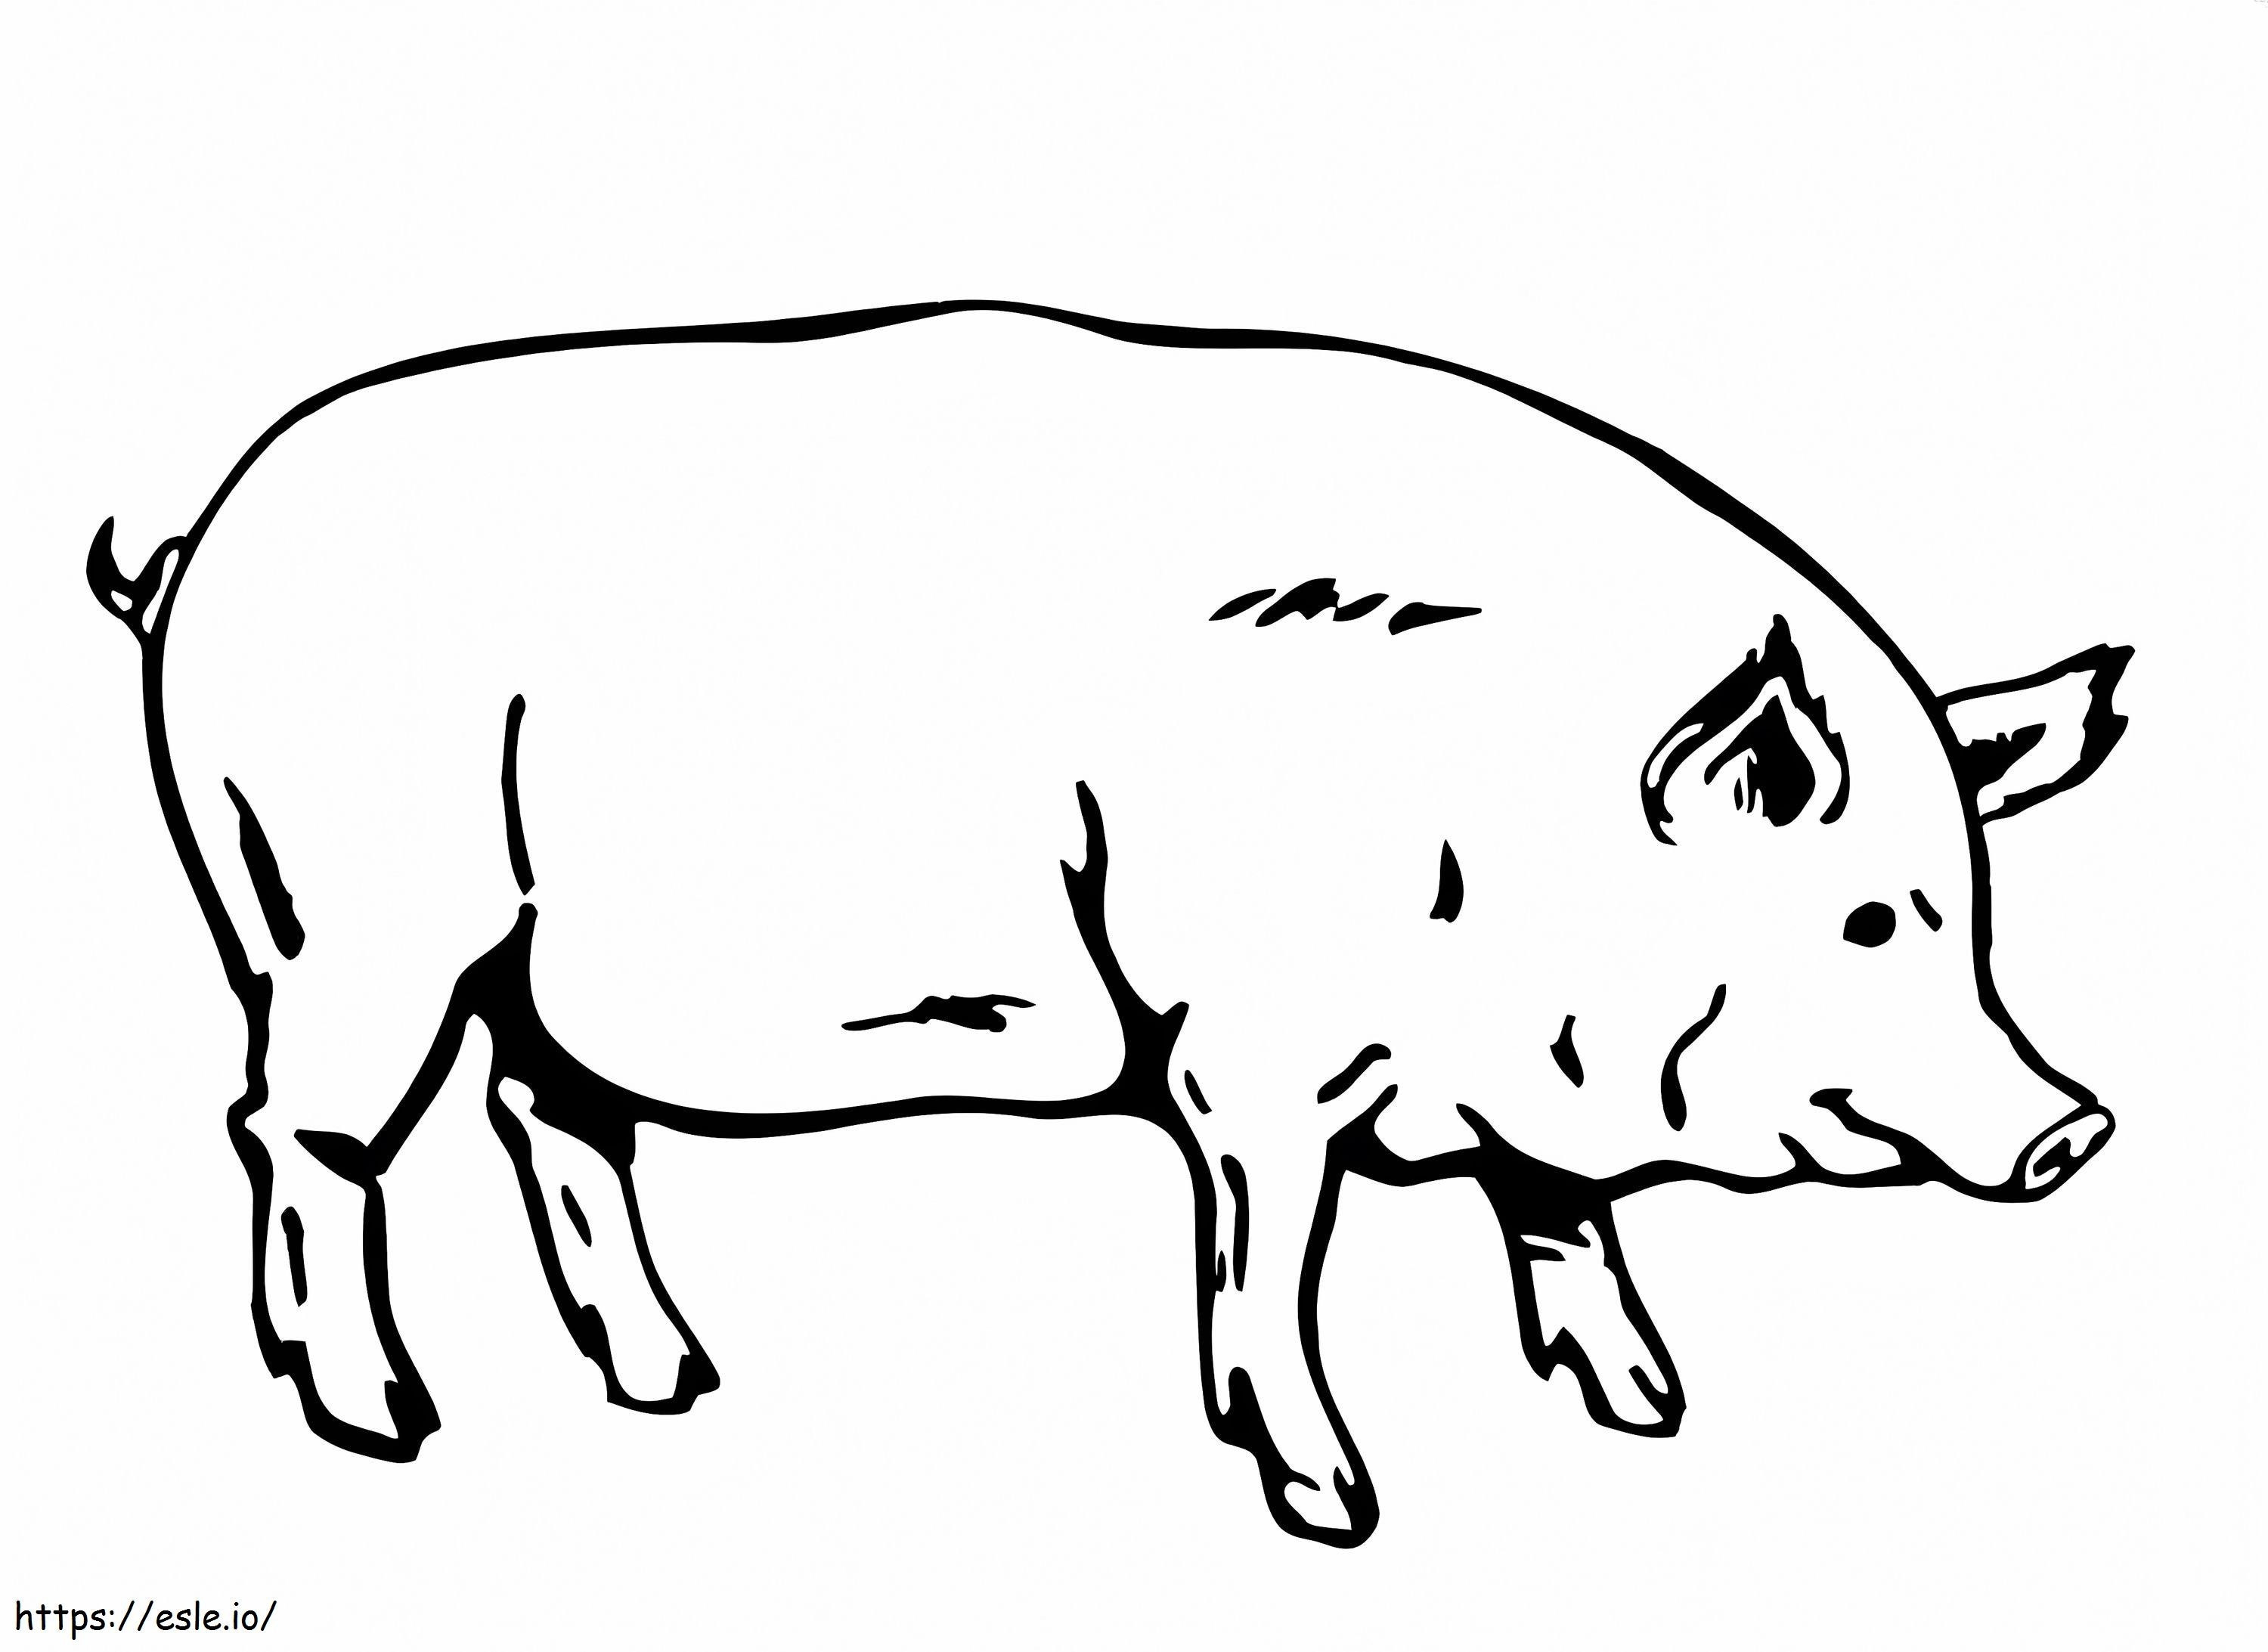 Fat Pig coloring page